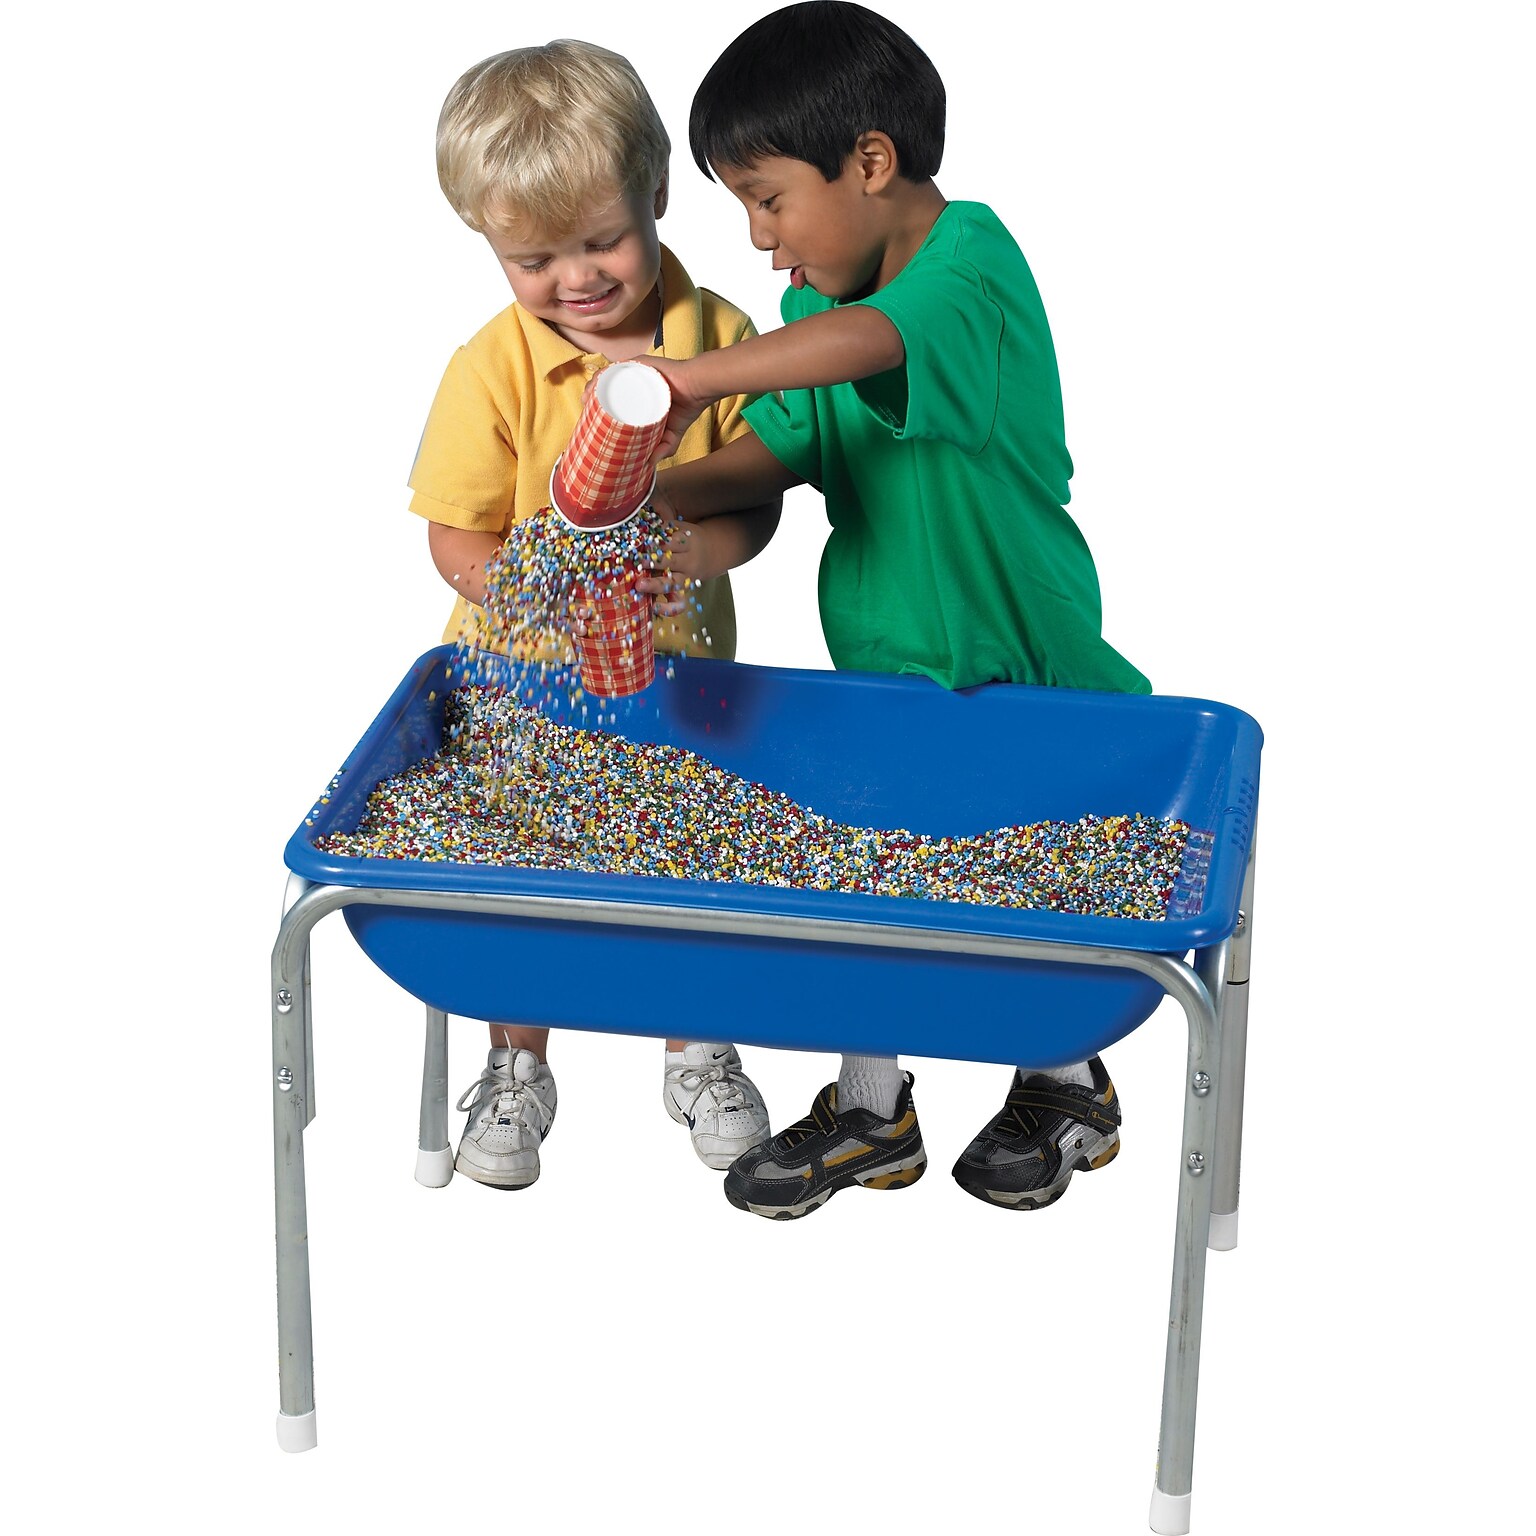 The Childrens Factory Kidfetti Plastic Play Pellets, Multicolored, Each (CF-910059)